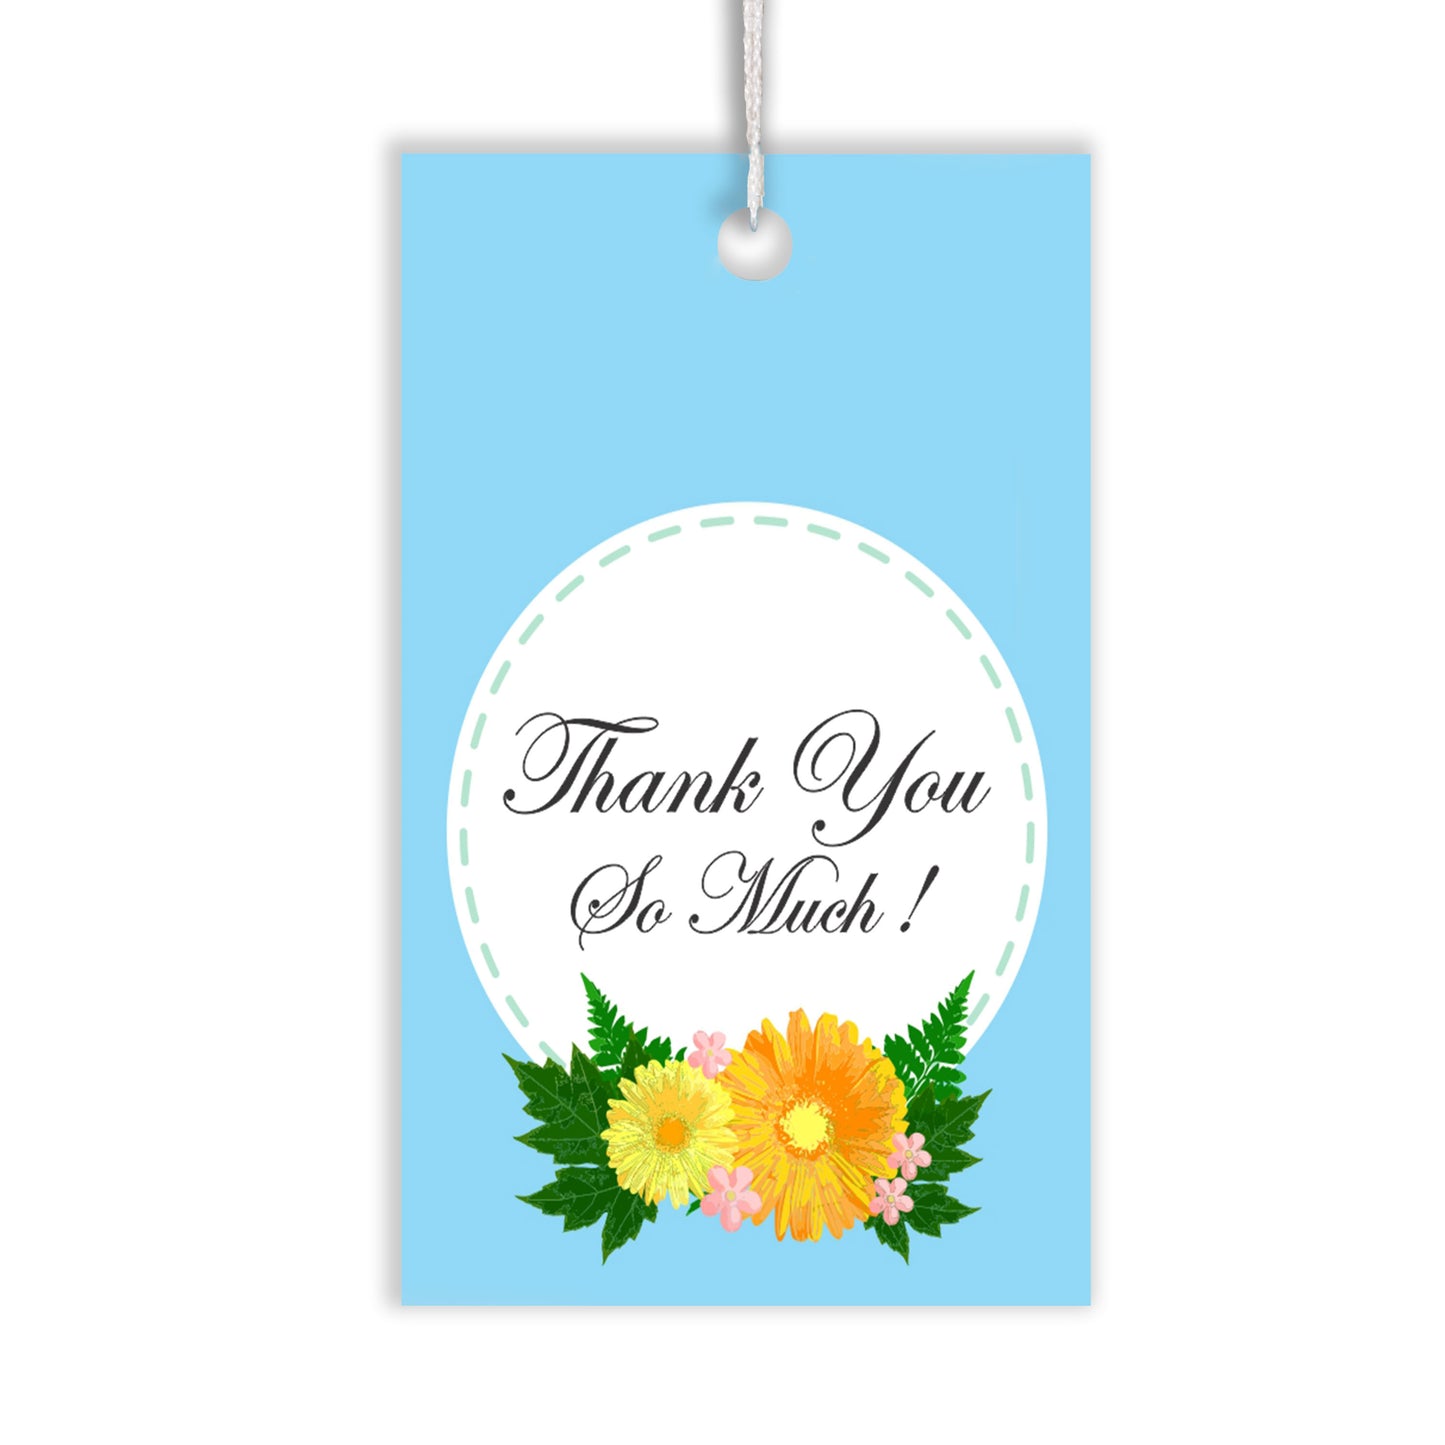 iberry's 100 pcs Thankyou Tags with Thread, Thankyou Tags for Return Gifts, Thankyou Tags for Small Business, Tags for Return Gifts-03